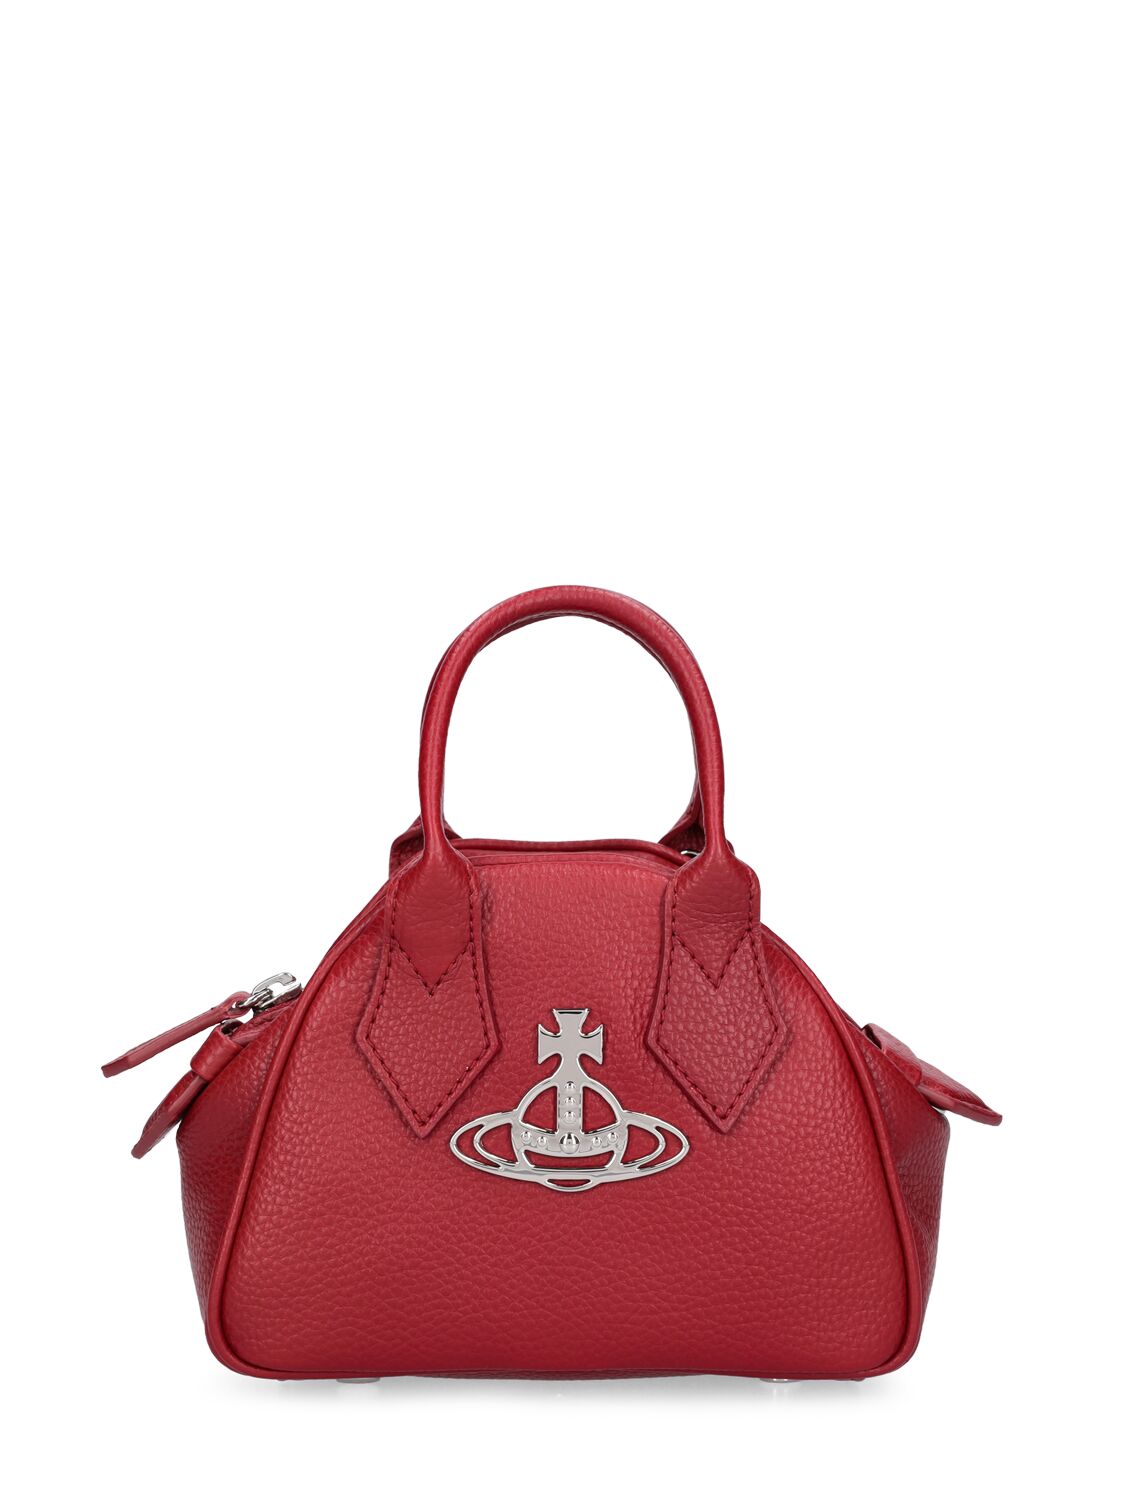 Vivienne Westwood Mini Yasmin Grained Faux Leather Bag In Red